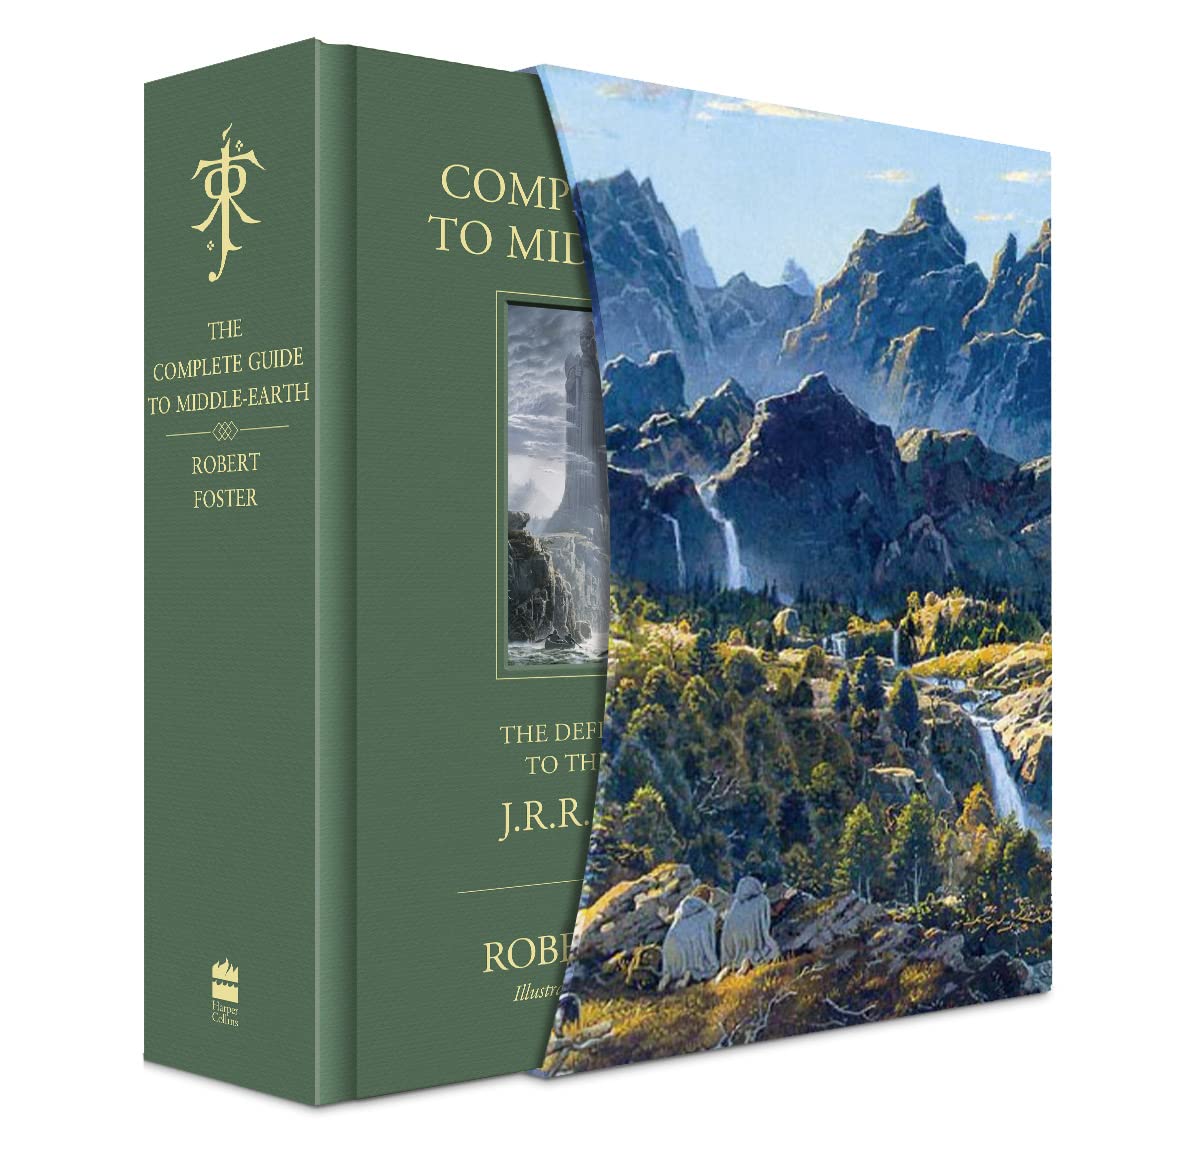 The Complete Guide to Middle-earth : The Definitive Guide to the World of J.R.R. Tolkien (Hardcover, Illustrated Deluxe edition)